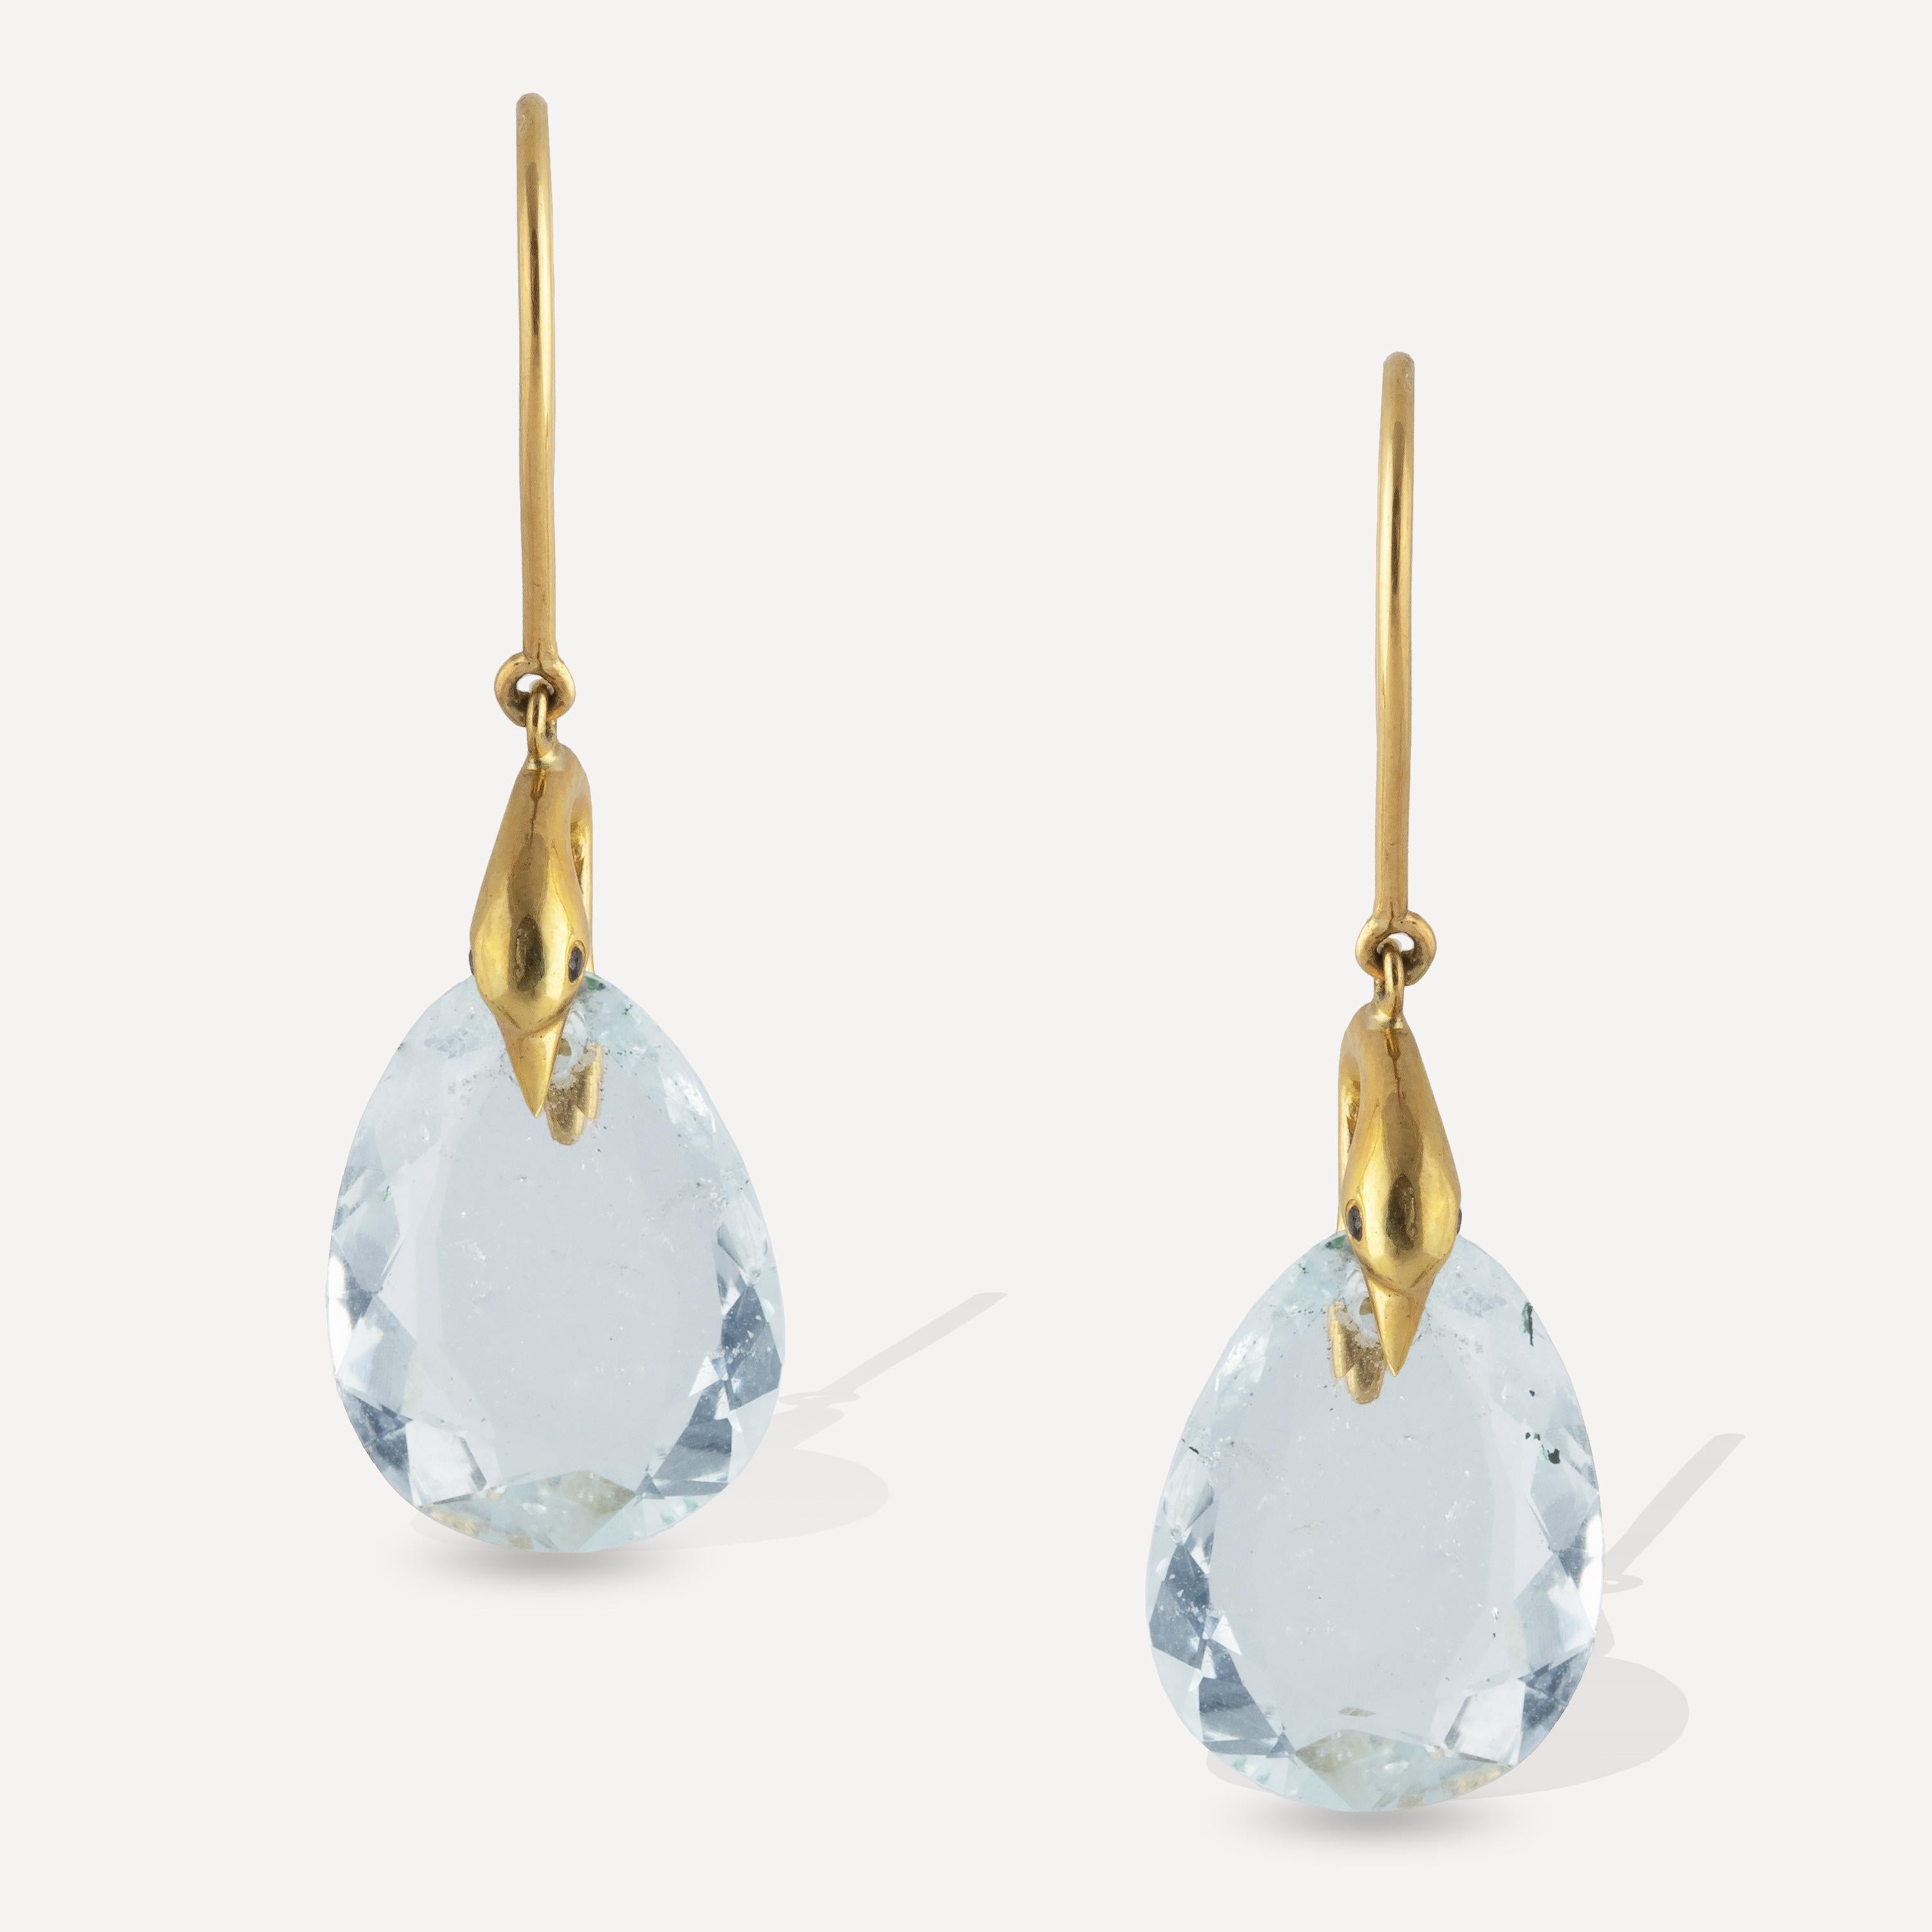 From the La Rondinai collection, a pair of stunning Aquamarine Drop earrings featuring bird heads with black diamond eyes.
This one of a kind piece features 20 carat of Sparkling Aquamarines and .018 carats of diamonds set in 18k yellow gold.
This